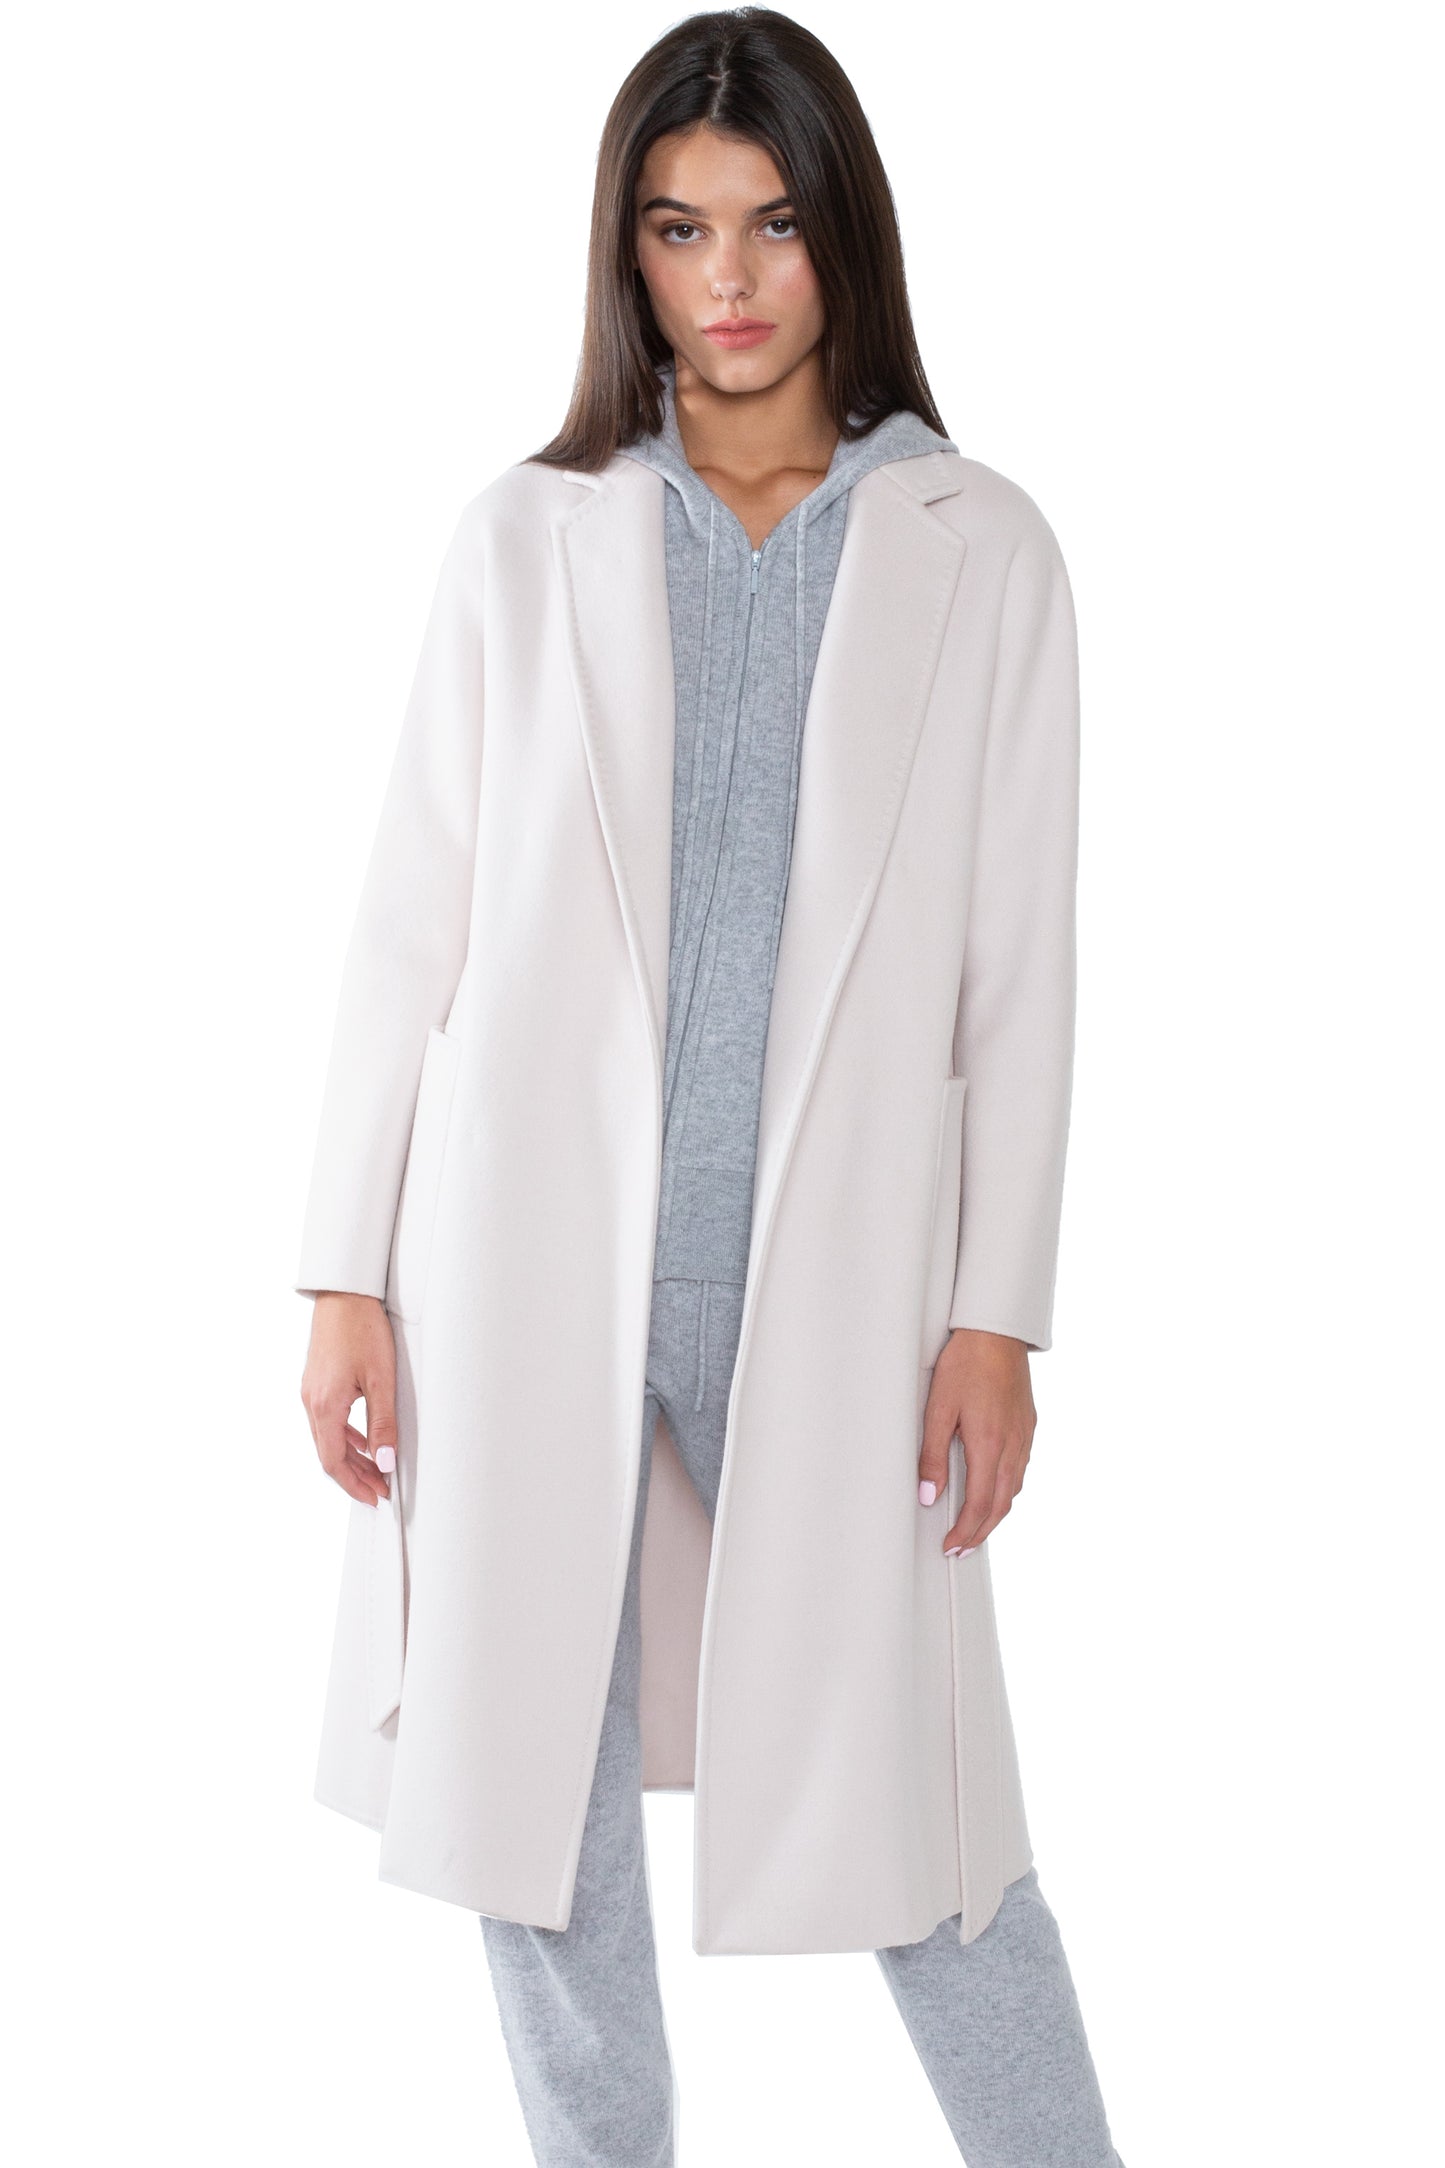 JENNIE LIU WOMEN'S CASHMERE WOOL DOUBLE FACE TRENCH COAT WITH BELT